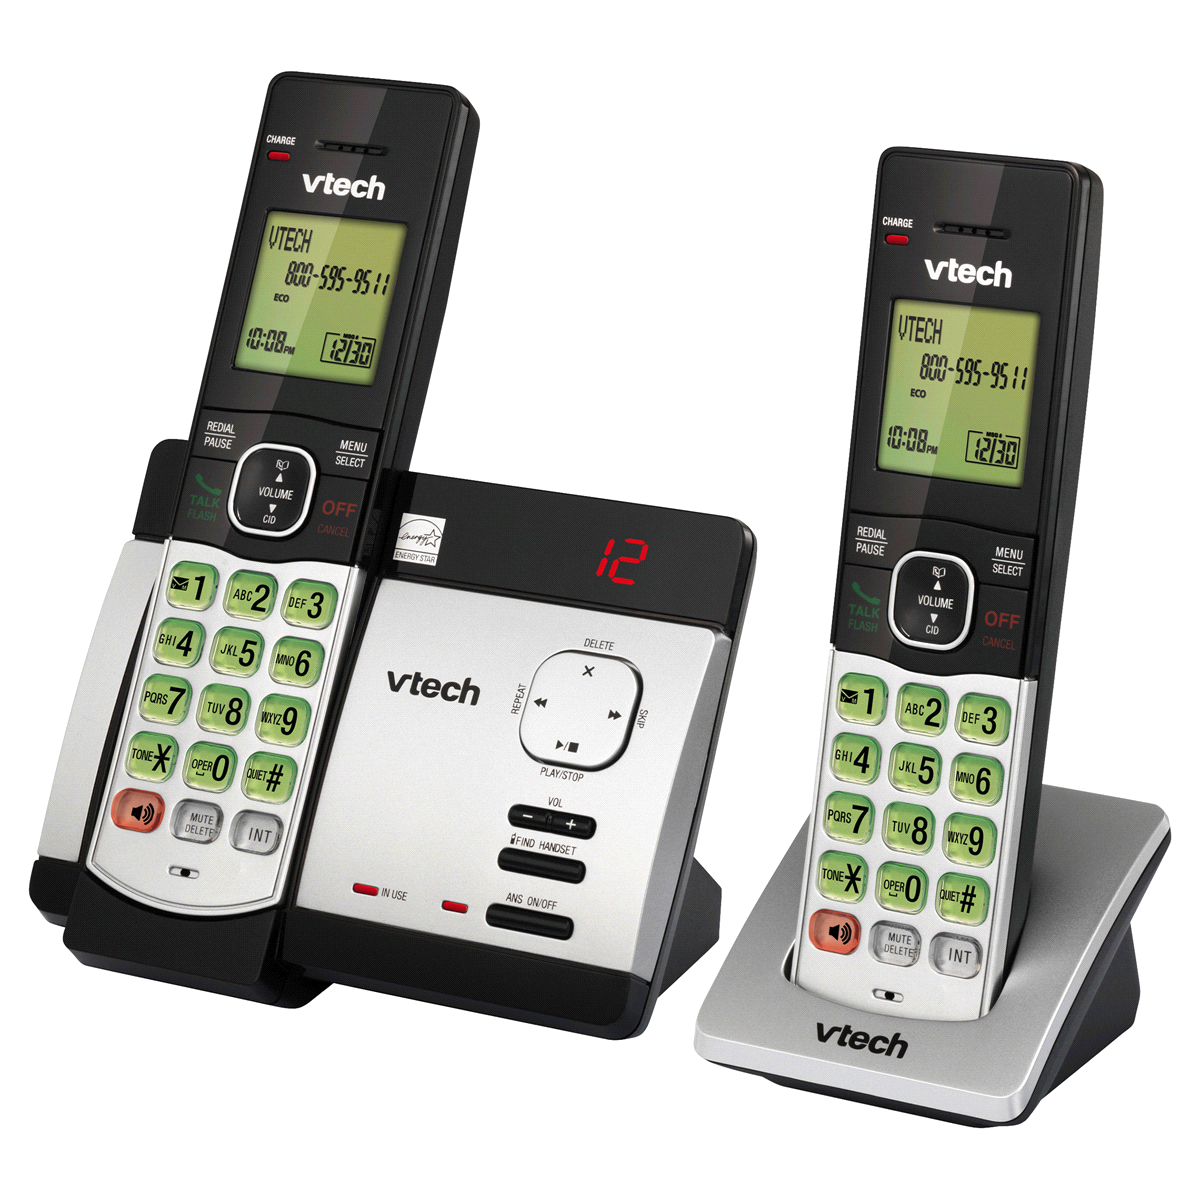 slide 2 of 2, VTech Handset Answering System with Caller ID, 1 ct